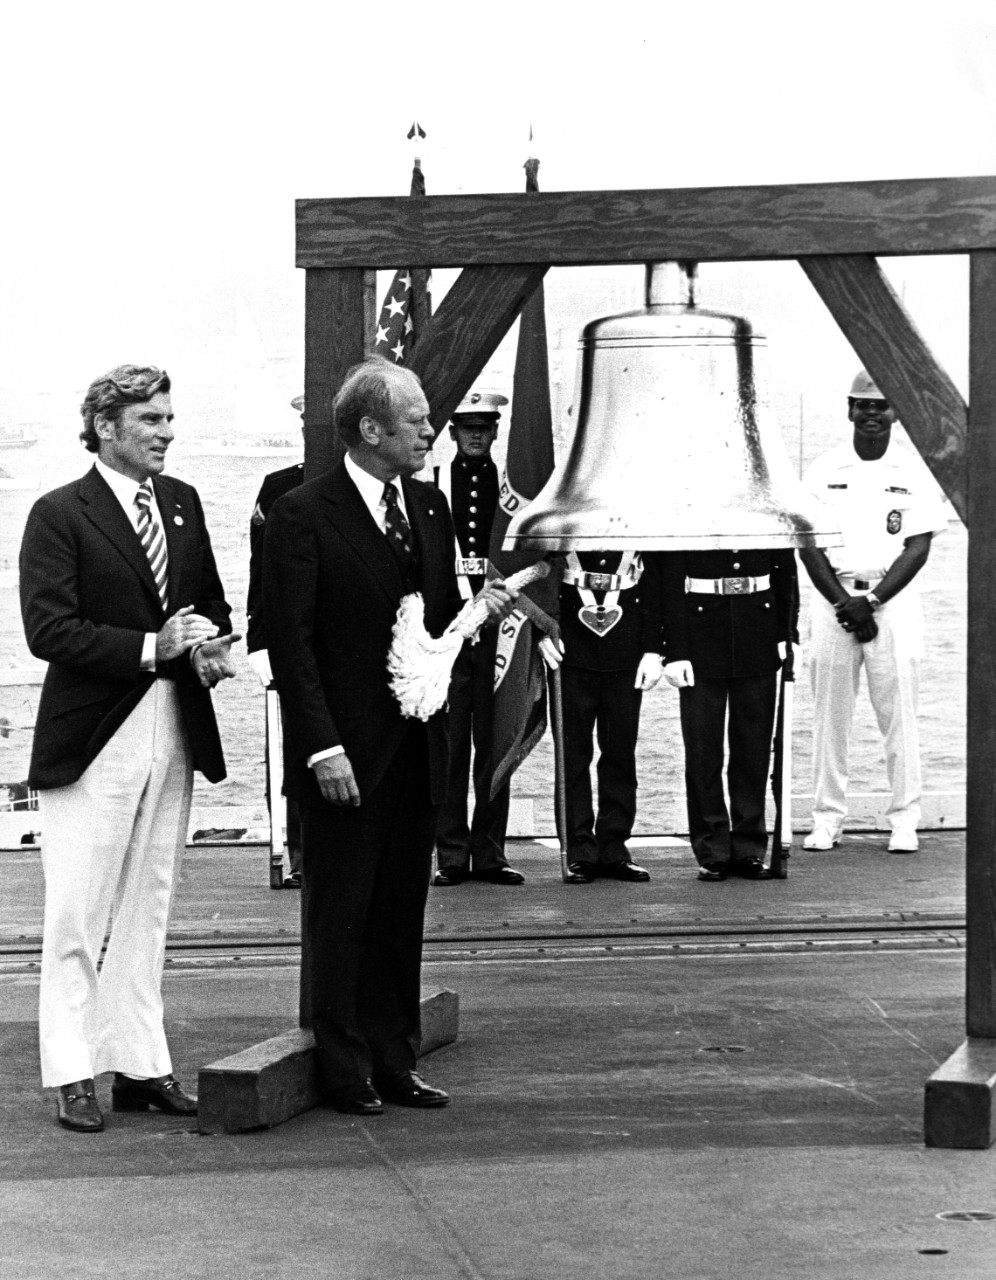 760704-N-ZZ999-106: USS Forrestal (CV-59), 1976.  President Gerald R. Ford rings the ceremonial bell aboard the aircraft carrier USS Forrestal (CV 59) during the international naval review and the nation's bicentennial activities on Independence Day, July 4, 1976.   Official U.S. Navy Photograph, now in the collections of the Naval History and Heritage Command.  